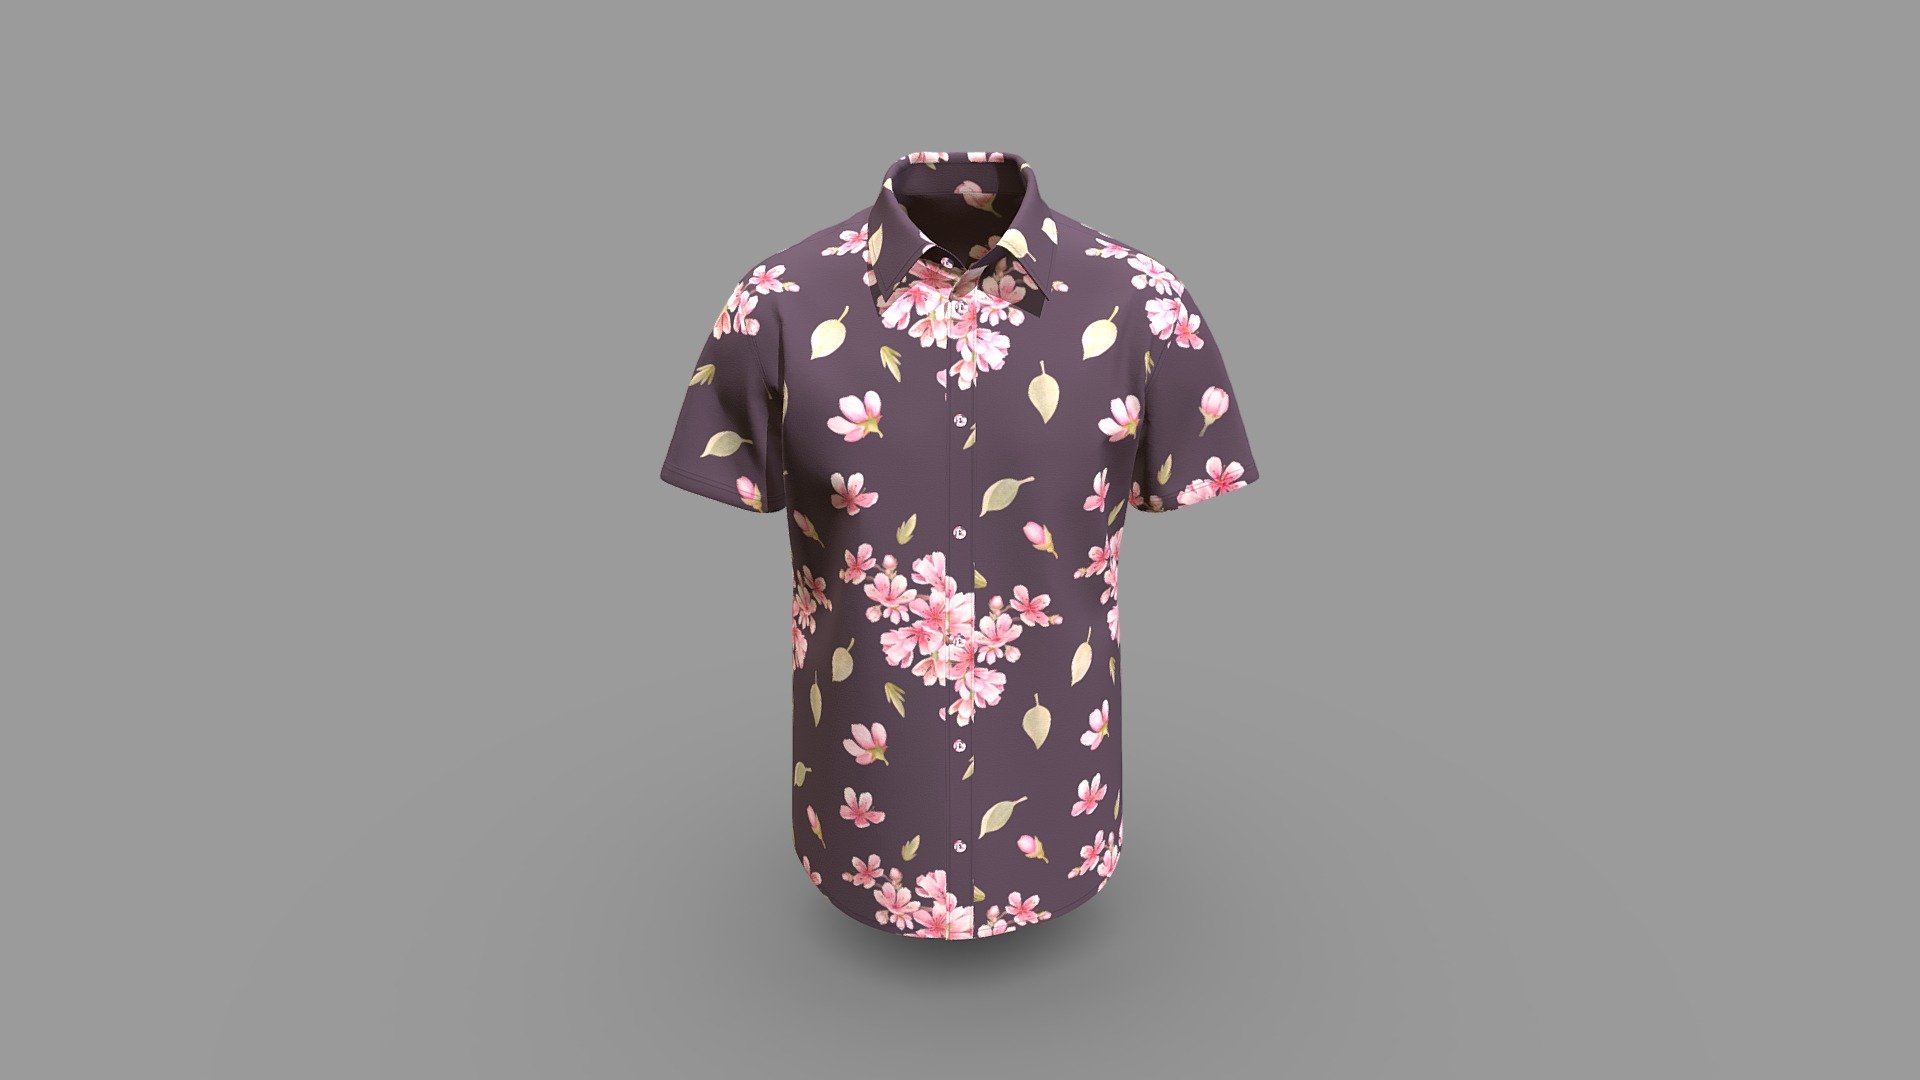 Cloth Title = Men Slim Fit Casual Short Sleeve Shirt Design 

SKU = DG100073 

Category = Men 

Product Type = Shirt 

Cloth Length = Regular 

Body Fit = Slim Fit 

Occasion = Casual  

Sleeve Style = Short Sleeve


Our Services:

3D Apparel Design.

OBJ,FBX,GLTF Making with High/Low Poly.

Fabric Digitalization.

Mockup making.

3D Teck Pack.

Pattern Making.

2D Illustration.

Cloth Animation and 360 Spin Video.


Contact us:- 

Email: info@digitalfashionwear.com 

Website: https://digitalfashionwear.com 


We designed all the types of cloth specially focused on product visualization, e-commerce, fitting, and production. 

We will design: 

T-shirts 

Polo shirts 

Hoodies 

Sweatshirt 

Jackets 

Shirts 

TankTops 

Trousers 

Bras 

Underwear 

Blazer 

Aprons 

Leggings 

and All Fashion items. 





Our goal is to make sure what we provide you, meets your demand 3d model